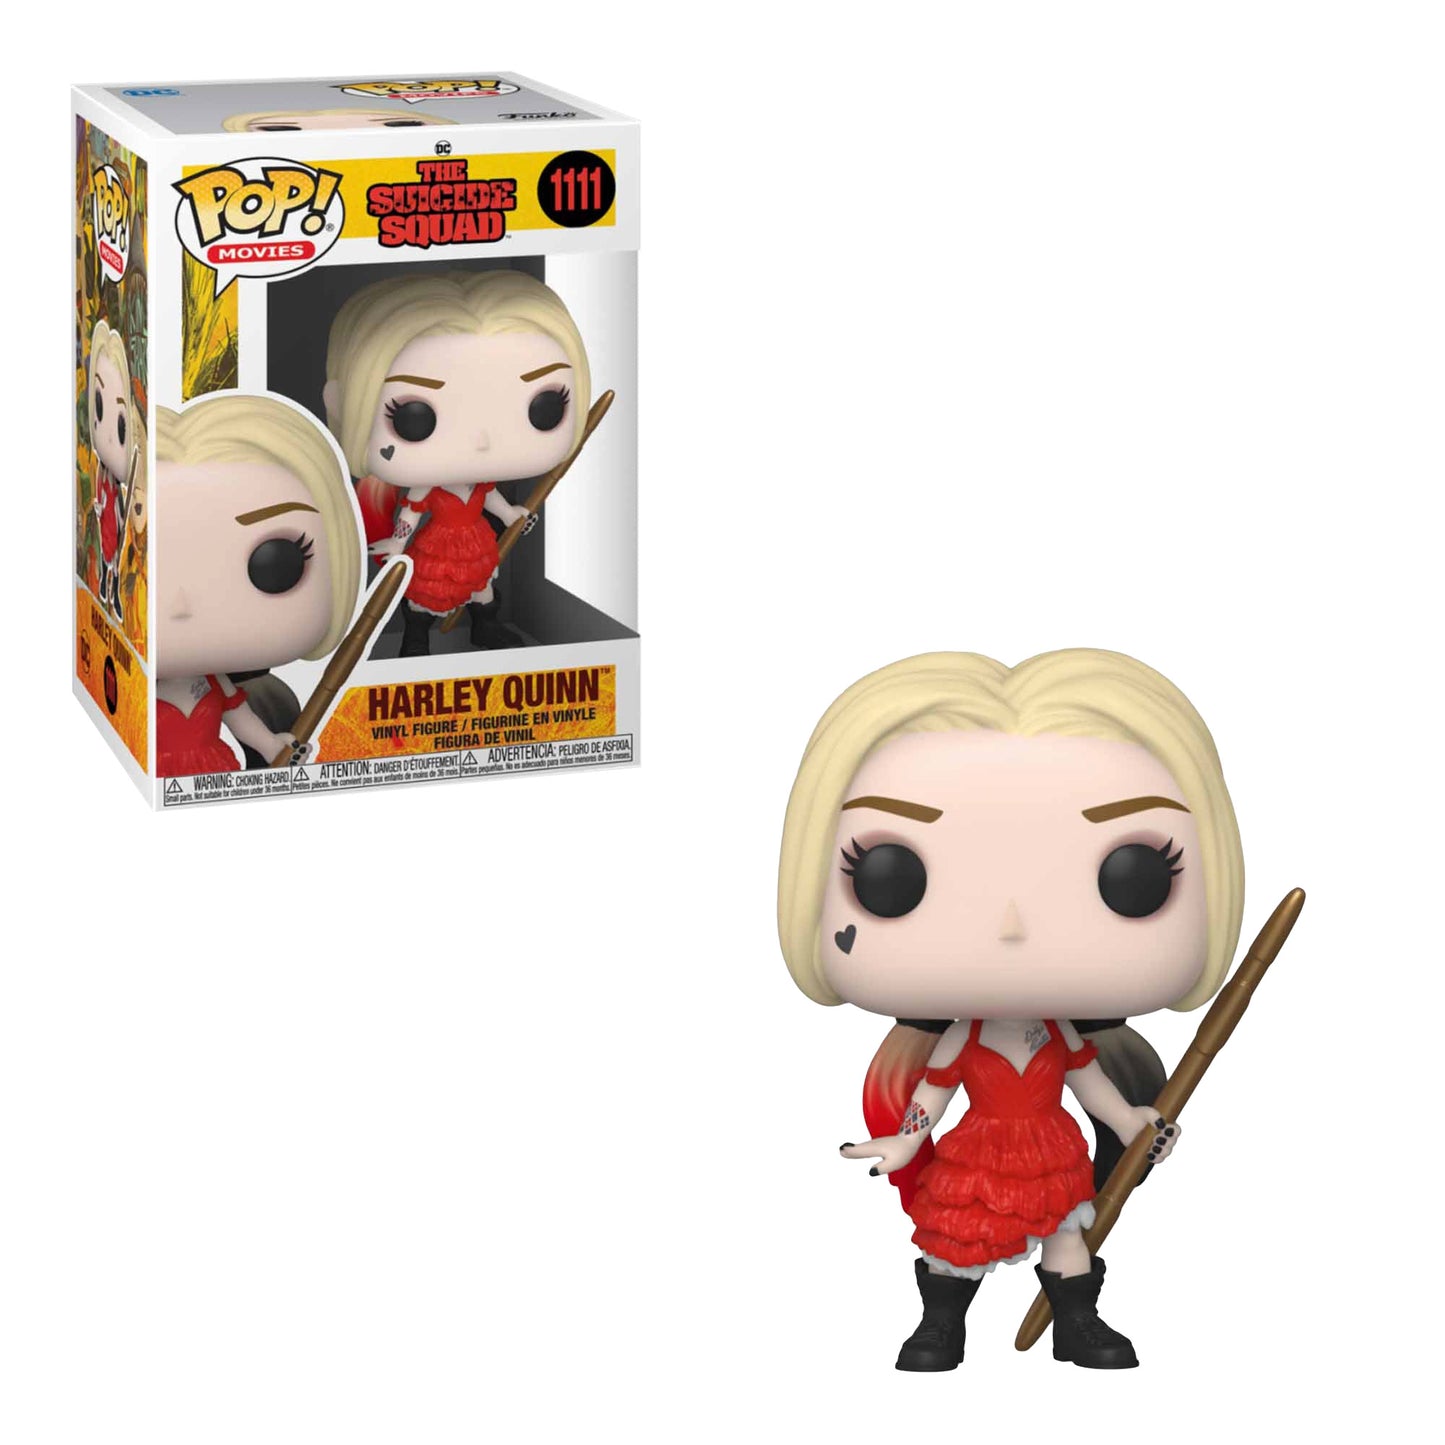 Funko Pop! Movies: DC - The Suicide Squad - Harley Quinn #1111